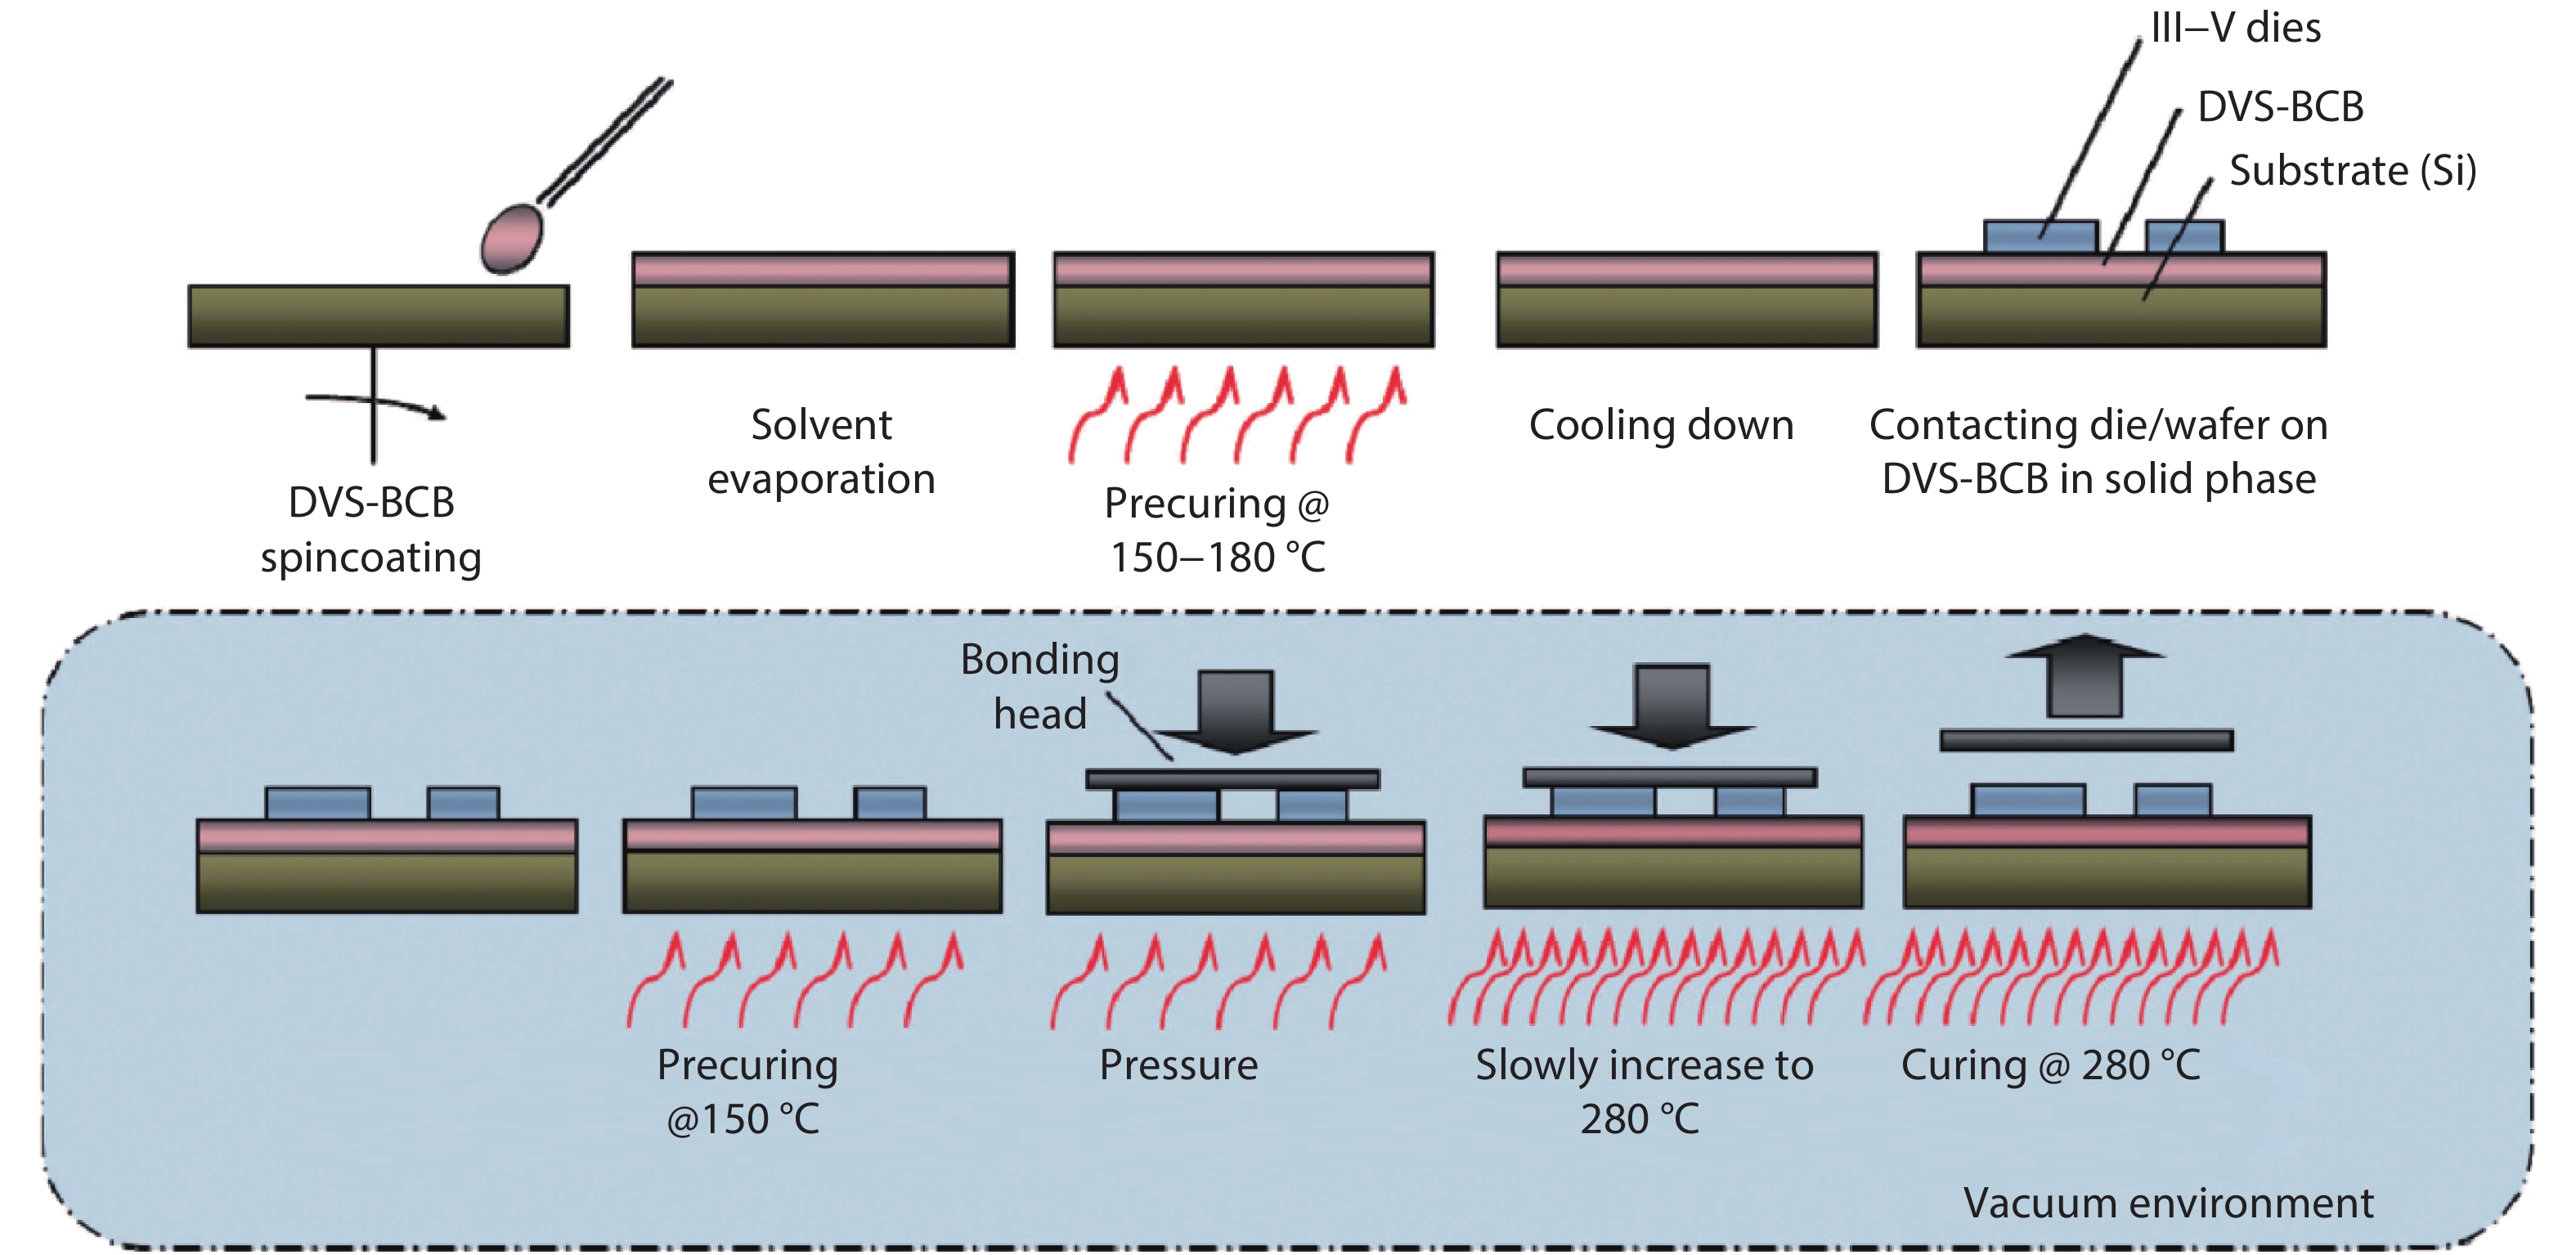 (Color online) Schematic process flow for DVS-BCB adhesive bonding, referred to as “cold bonding”. Reproduced from Ref. [17].